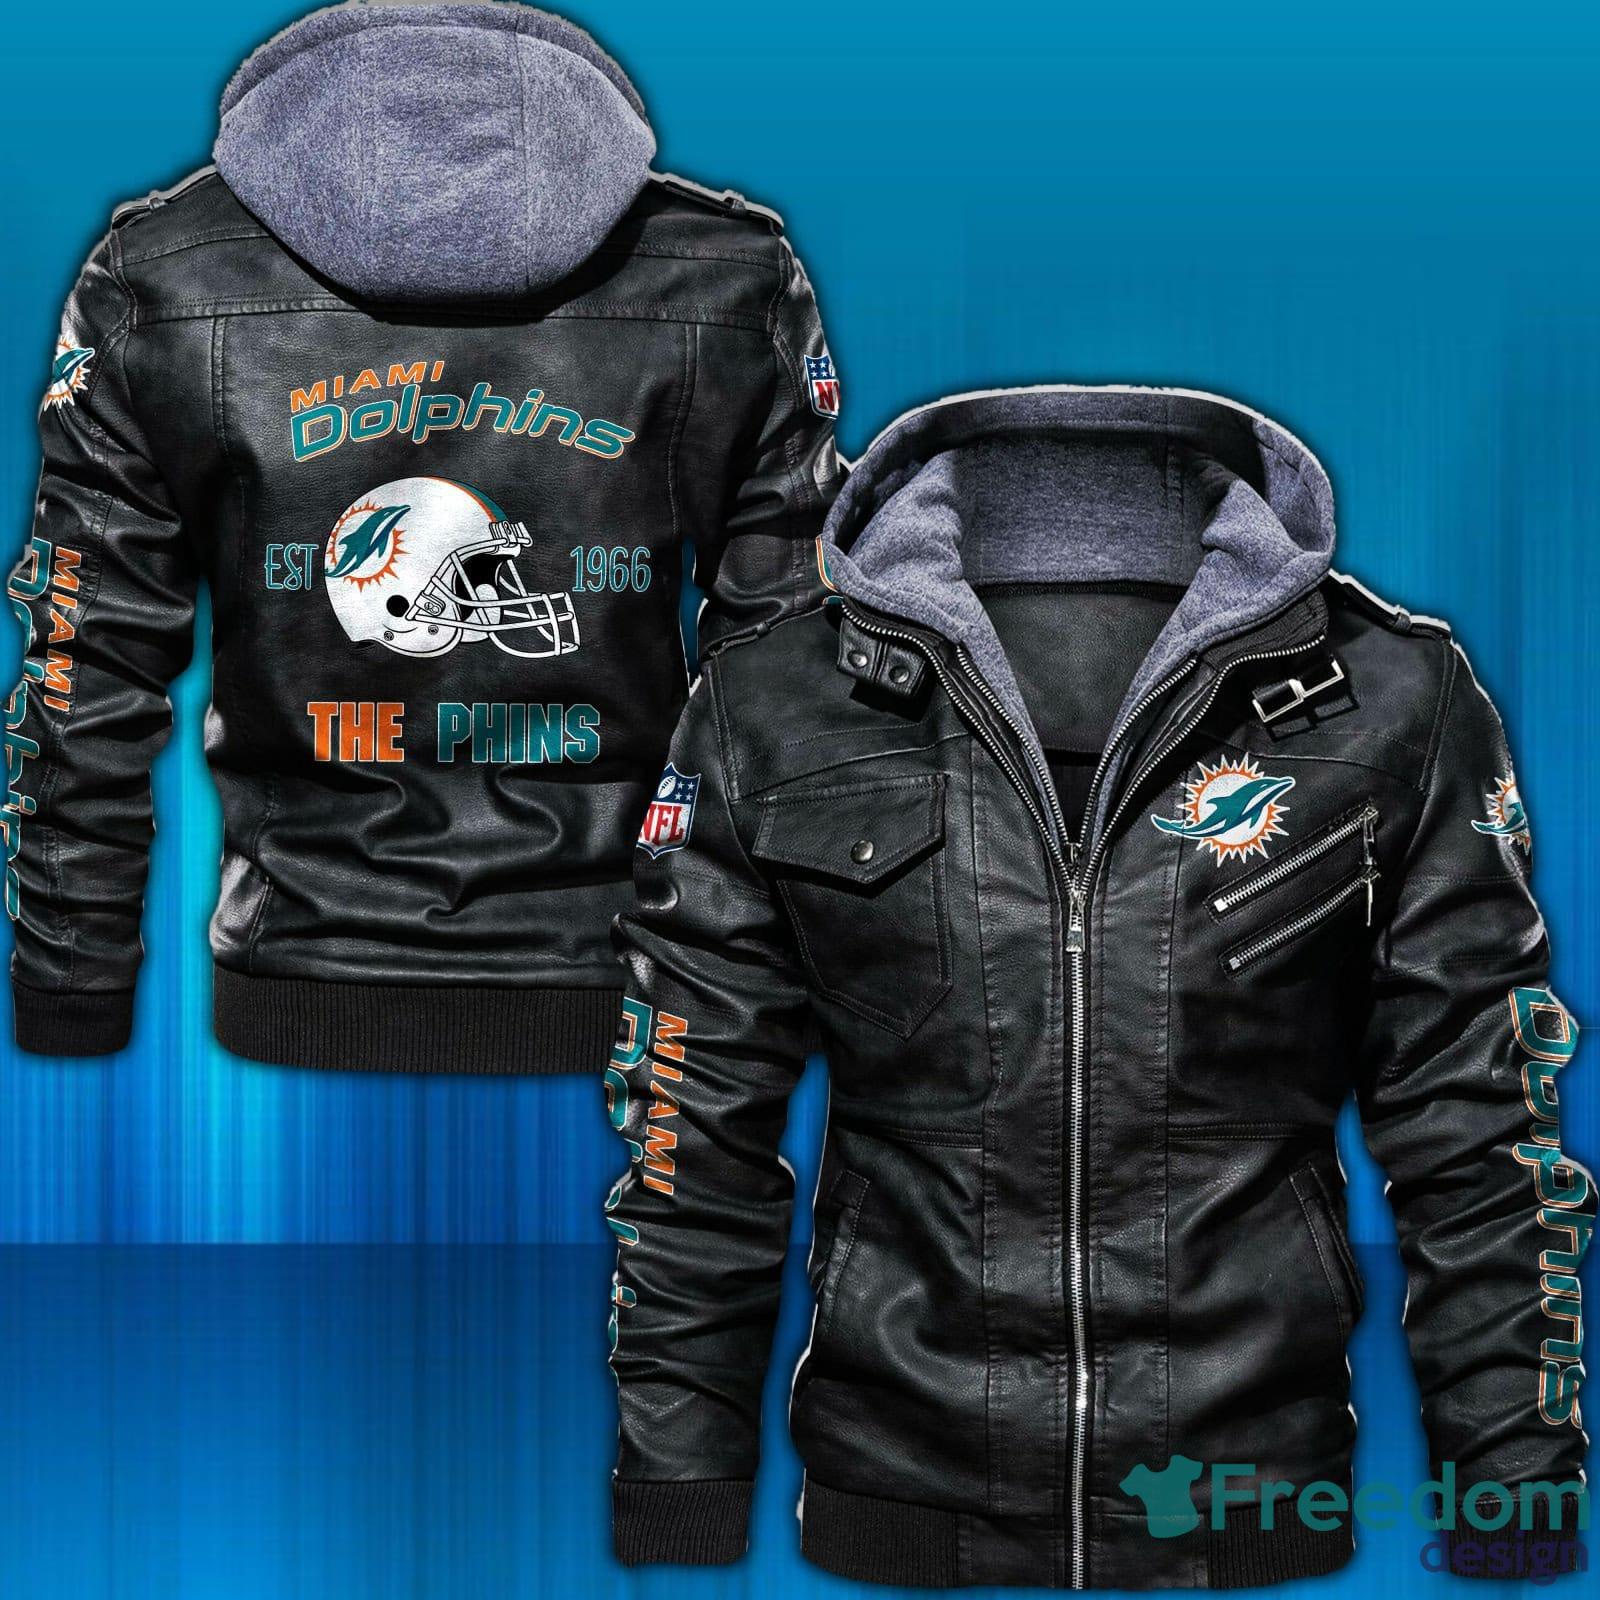 Miami Dolphins Shop - Miami Dolphins NFL The Dolphins Est 1966 Leather Jacket Black